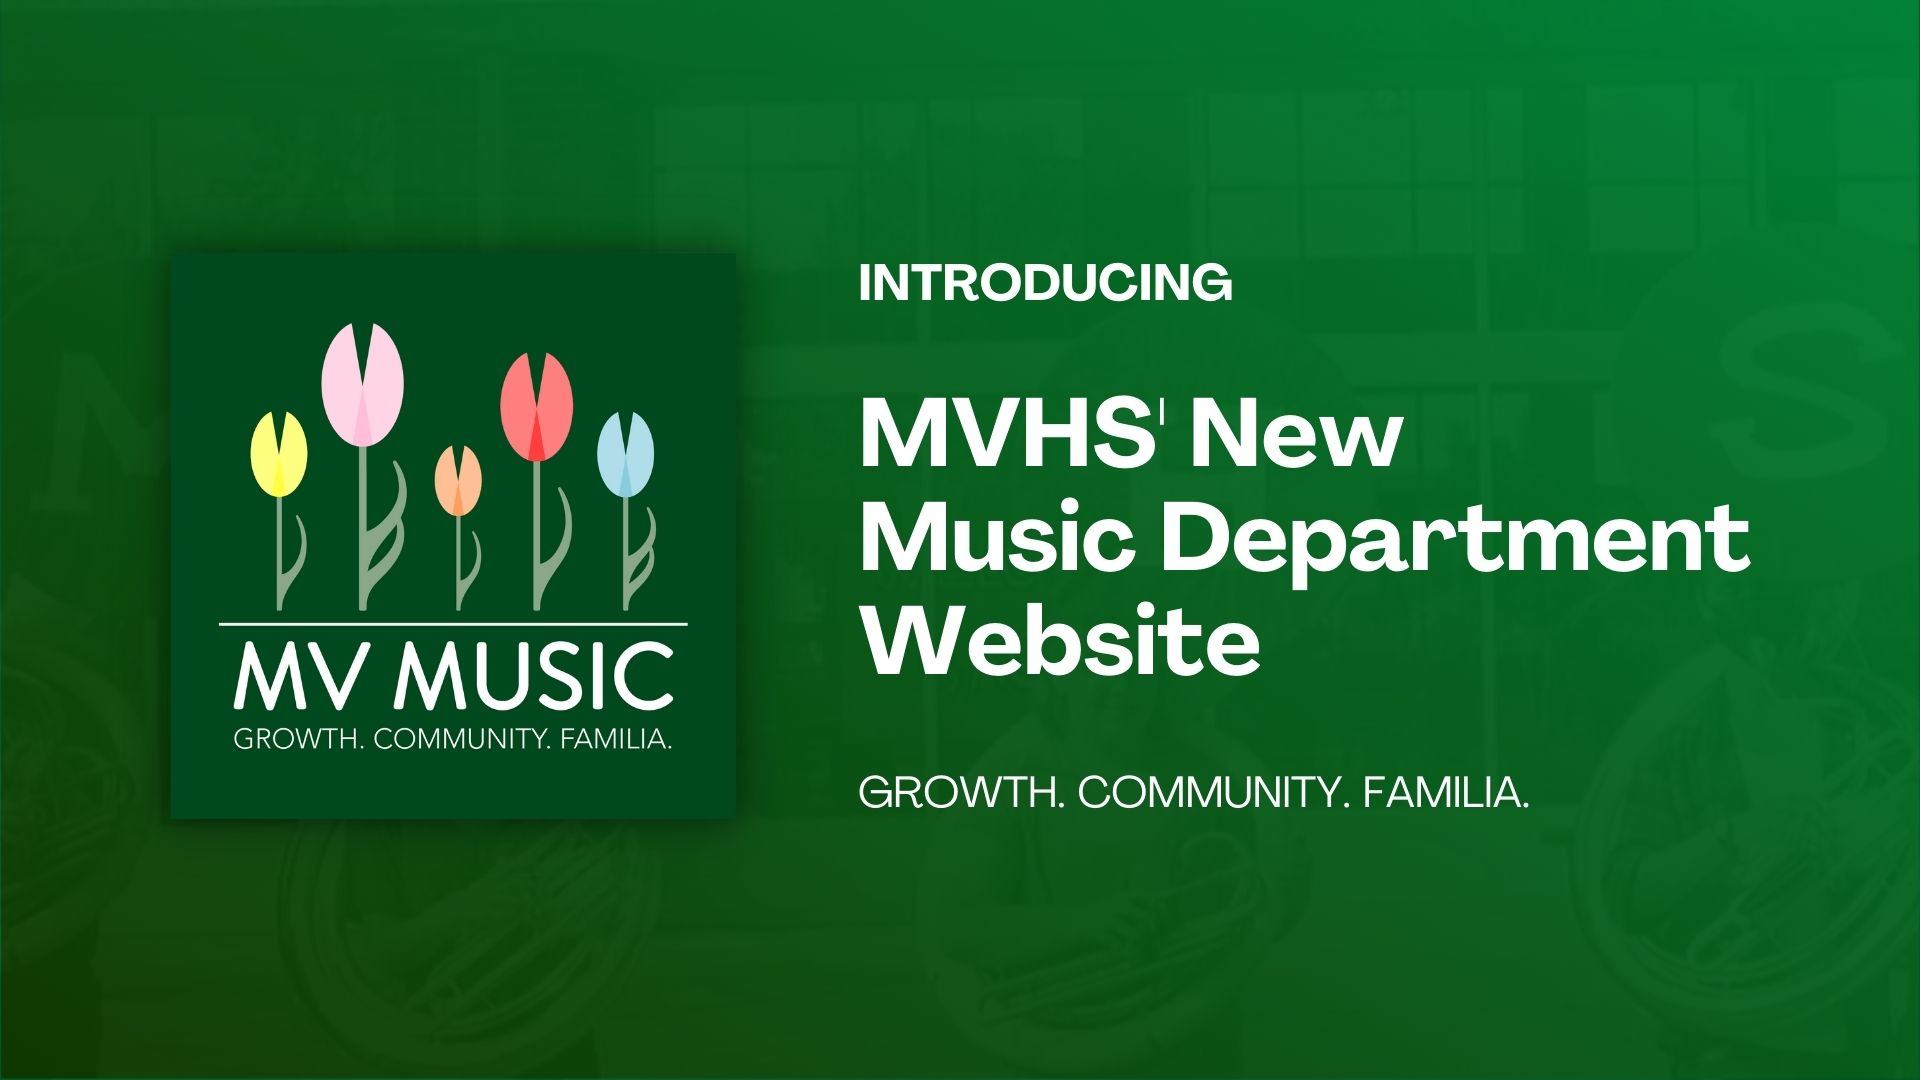 Introducing MVHS' New Music Department Website! Growth. Community. Familia. 